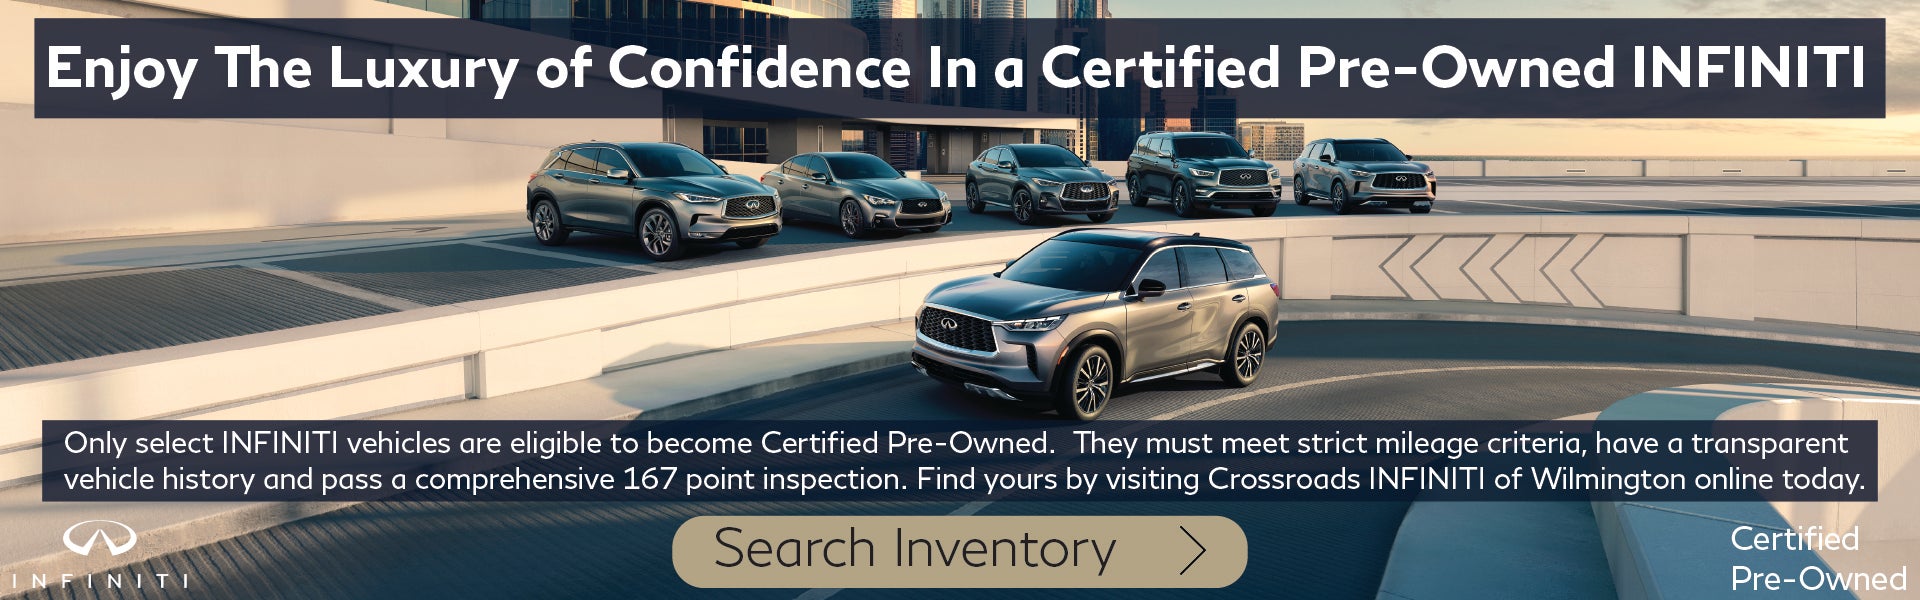 Certified Pre-Owned INFINITI Vehicles